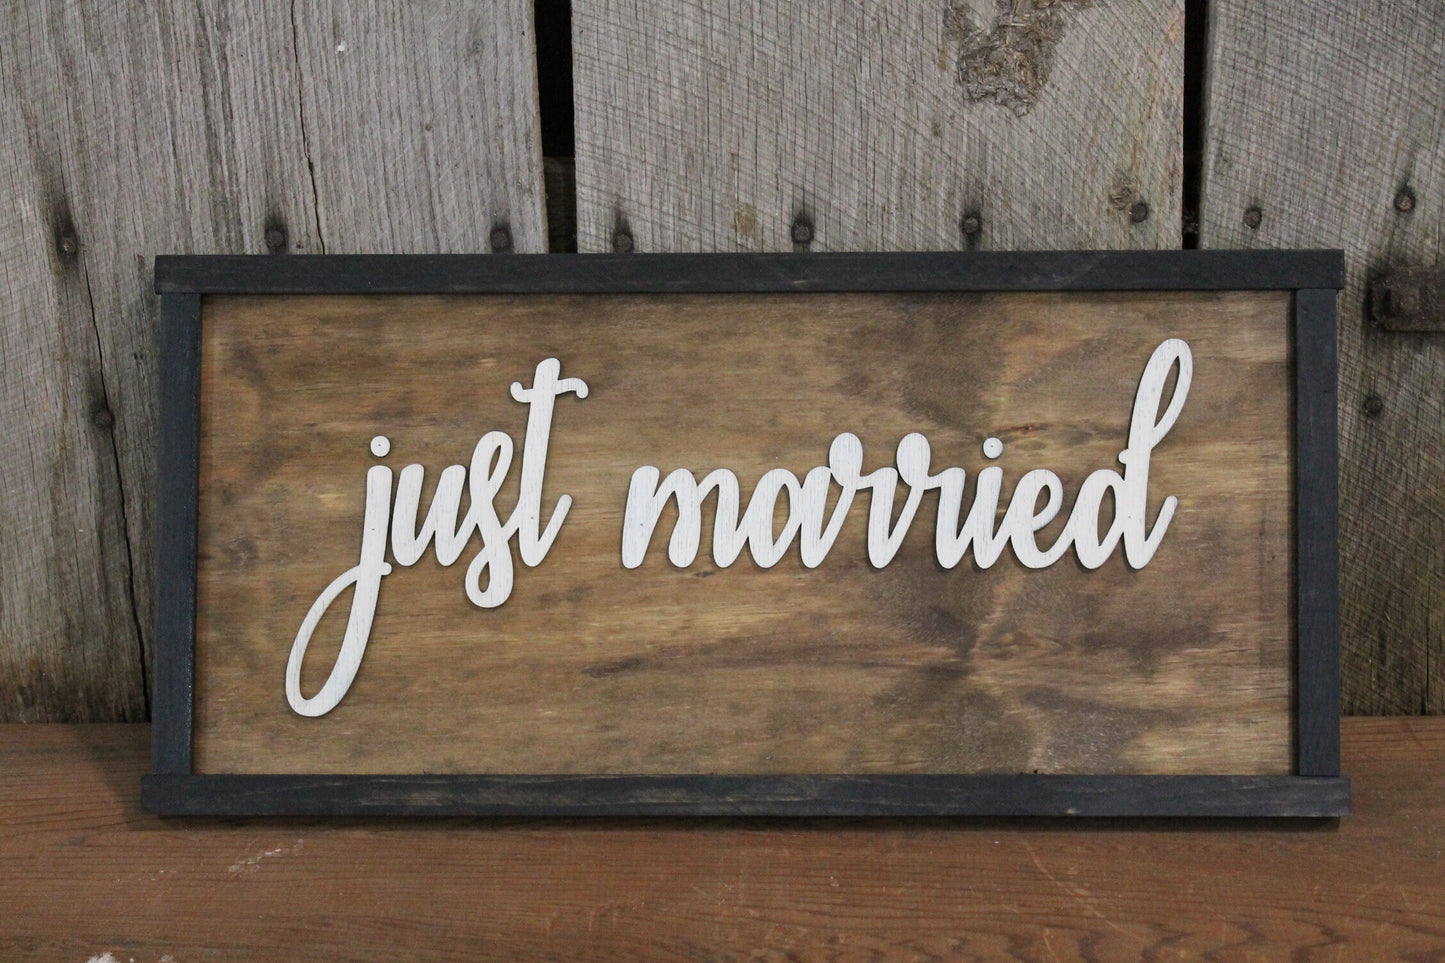 Just Married Sign Raised Text Wedding 3D Extra Large Framed Wood Car Window Photo Prop Hanging Wall Decor Country Style Barn Wood